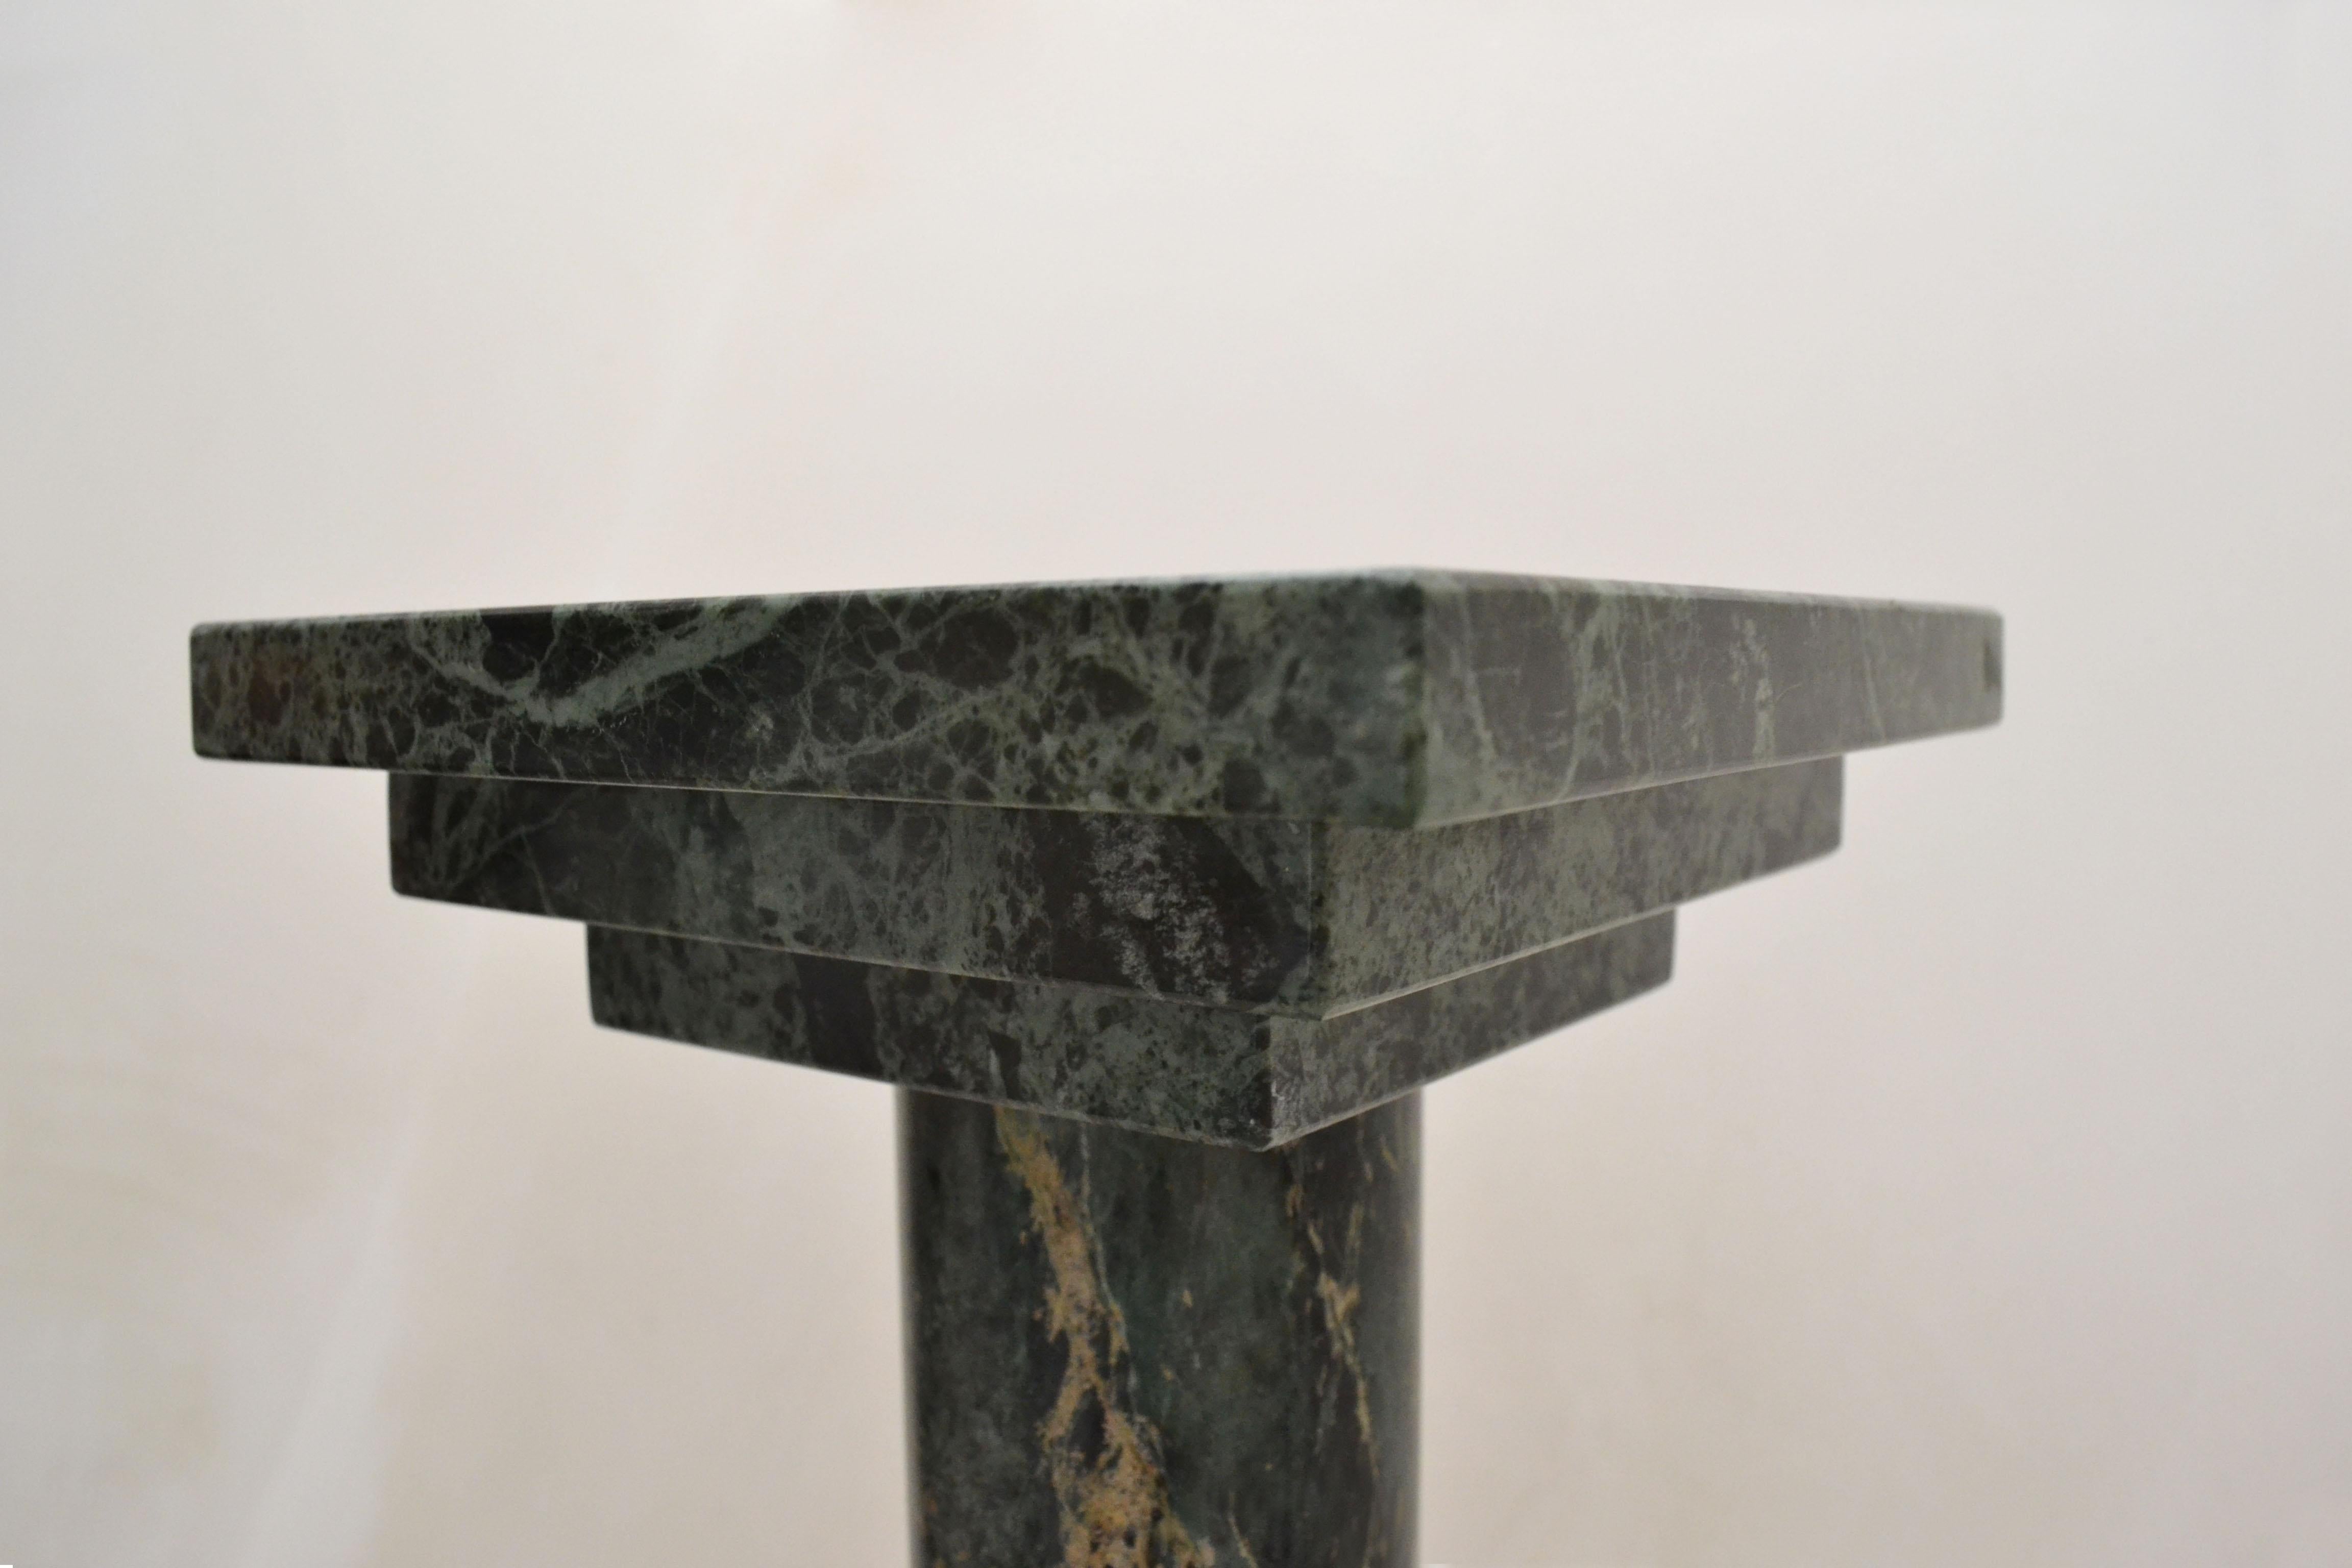 A marvelous podium - prefect to display a cherished item - or beautiful in its own right.

Crafted from a solid piece of Antique Green Marble, this piece is ideal to add that something extra to your home.

Available in different colours to suit any